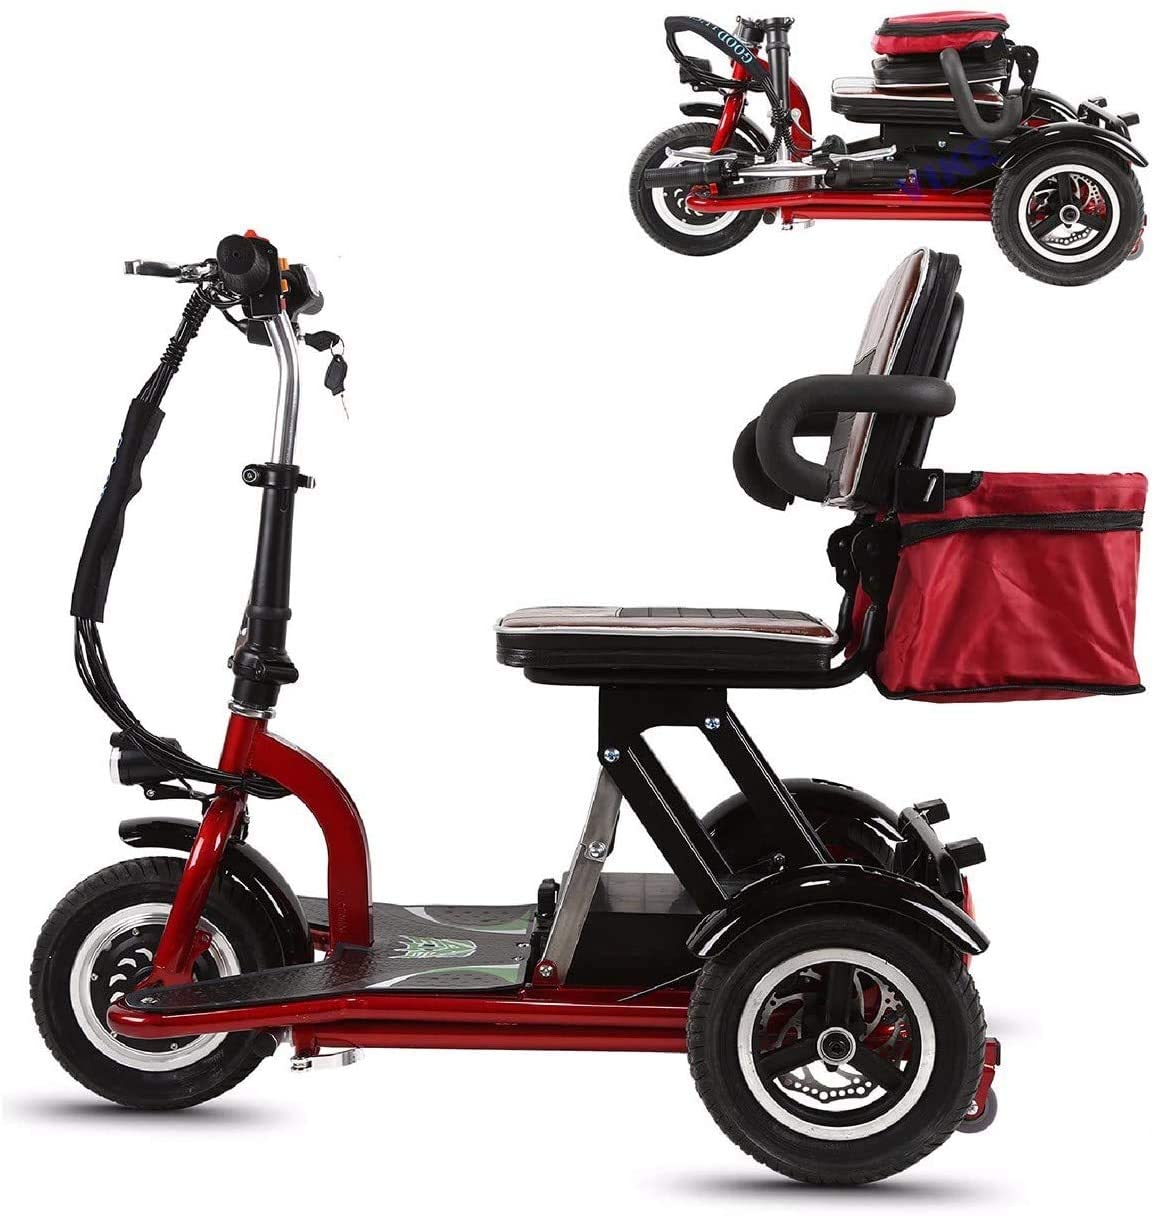 Qfzfei Folding Mobility Scooters,3 Wheeled Electric Mobility Scooter 300W Motor, 20km/H, 3 Speed Adjustment,Suitable For the Elderly, the Disabled, Adults (Size : 30KM)